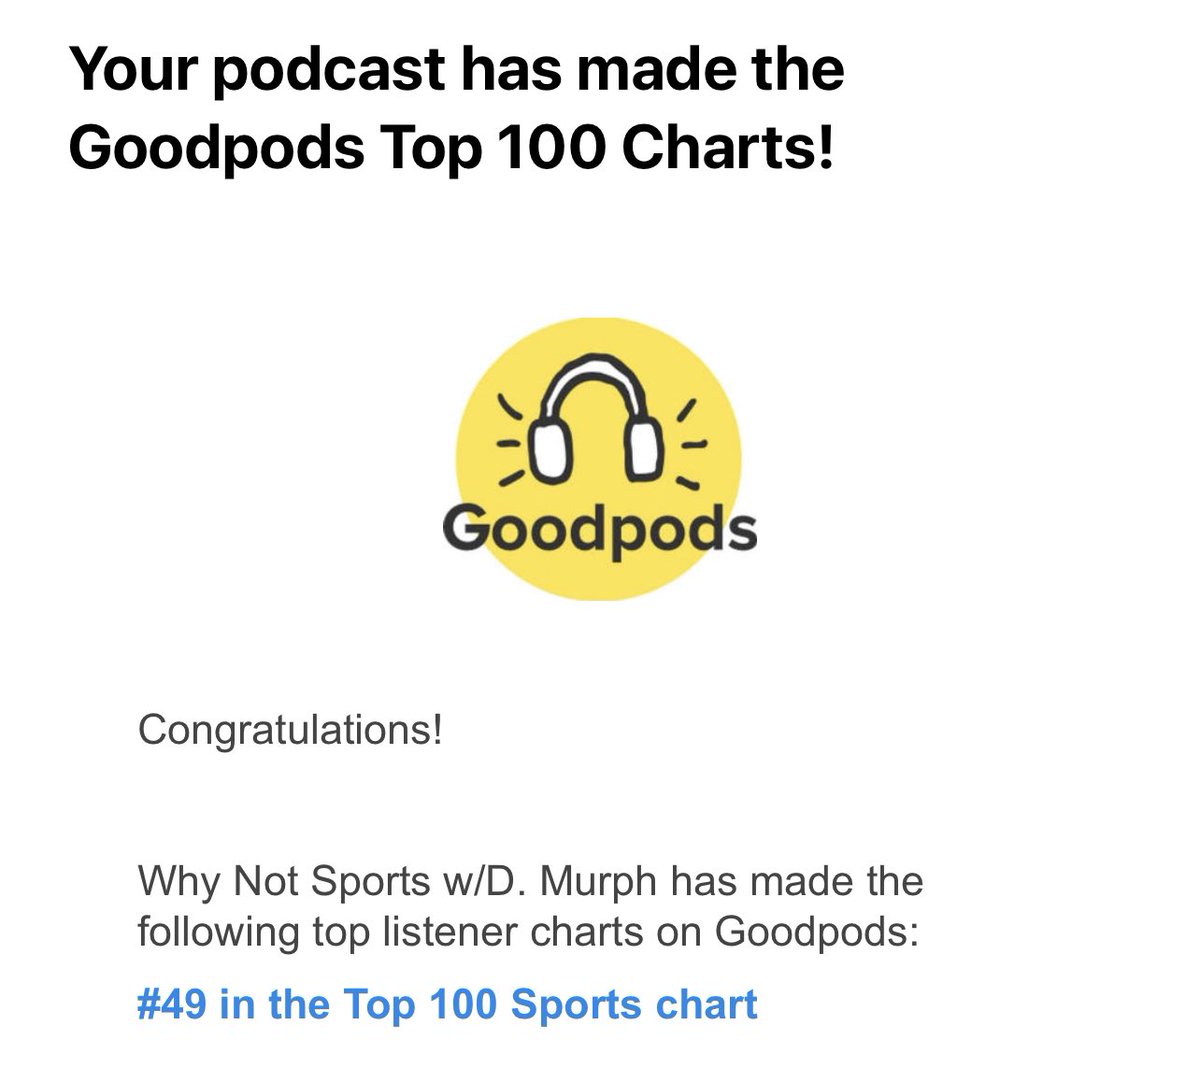 Look what I woke up to family, #49 in the Top 100 sports chart on @GoodpodsHQ! Thank you everyone for your continued support throughout the years! I am truly grateful 🙏🏾! #itsdmurph #whynotsports #Top100 #sportstalk #humbled #goodpods #consistency #staytuned